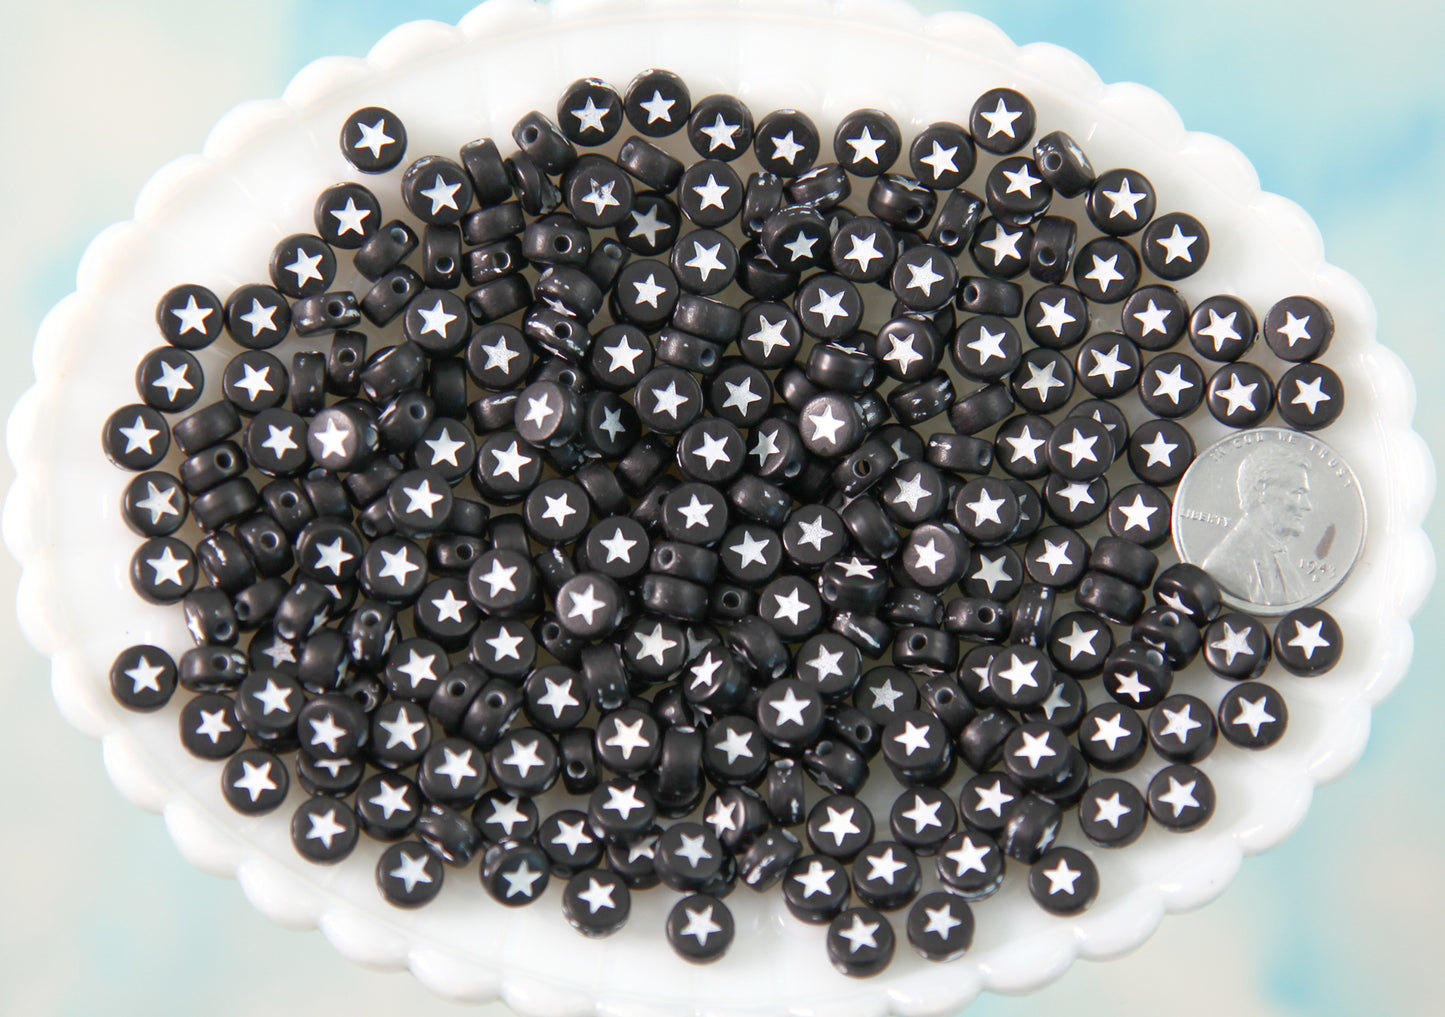 Stars for Letter Beads - 7mm Little Black Star Round Beads for use with Alphabet Beads - 300 pc set